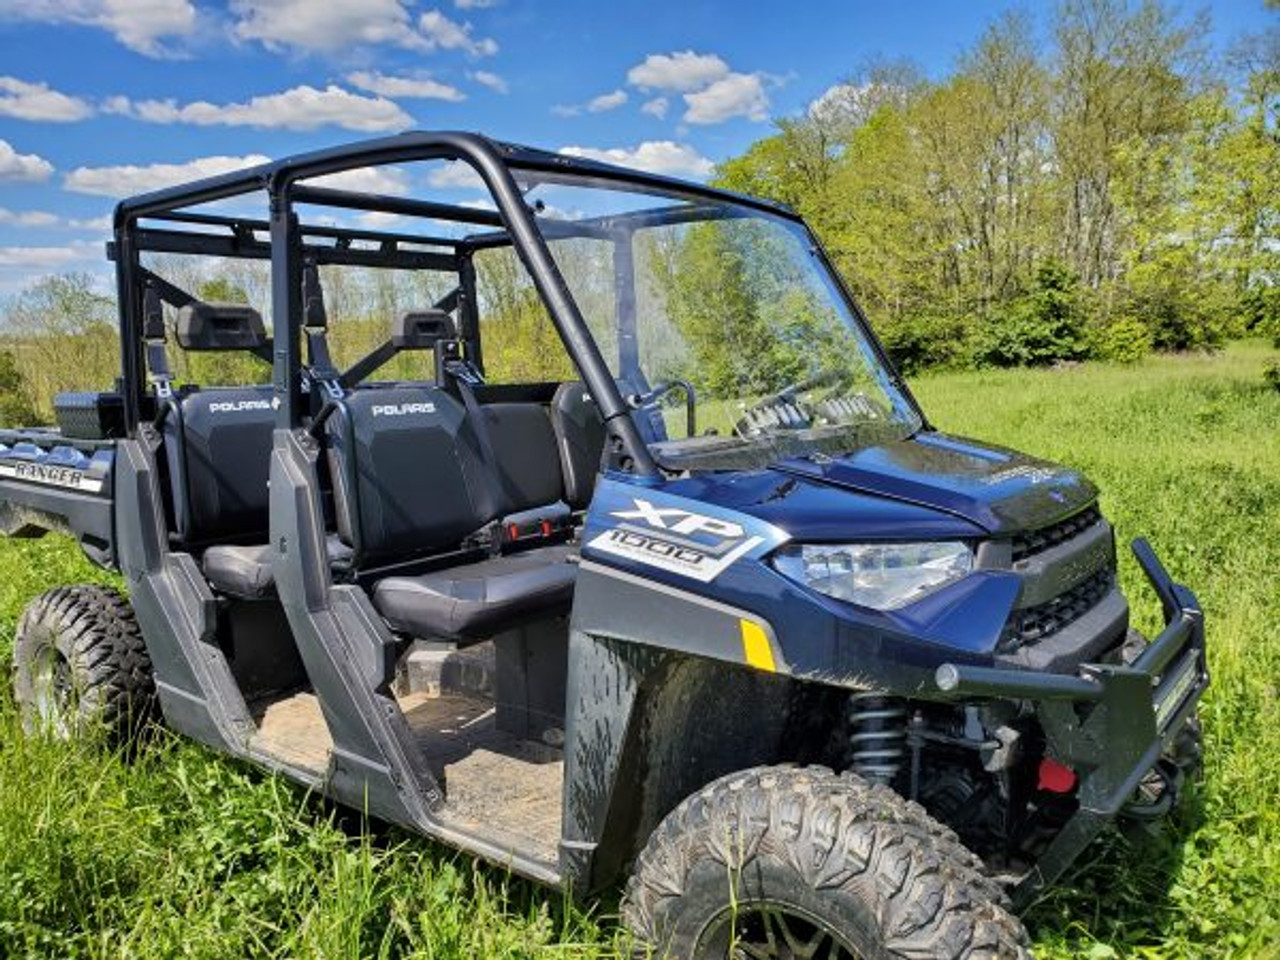 3 Star side x side Polaris Ranger Crew 1000/XP1000 windshield front and side view